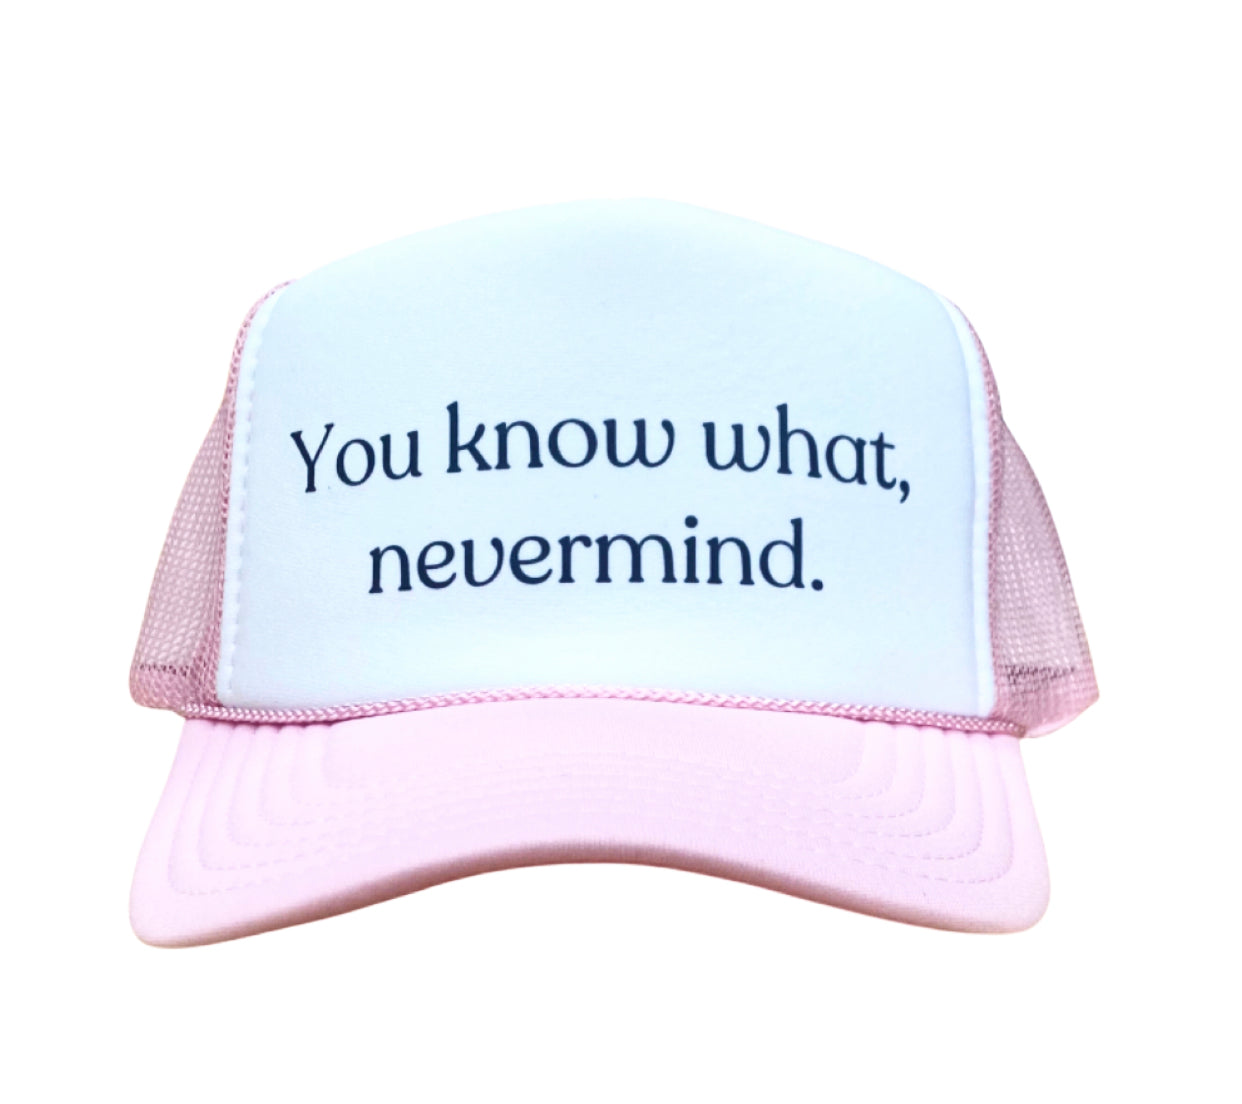 Do You Know The Muffin Man Essential' Trucker Cap